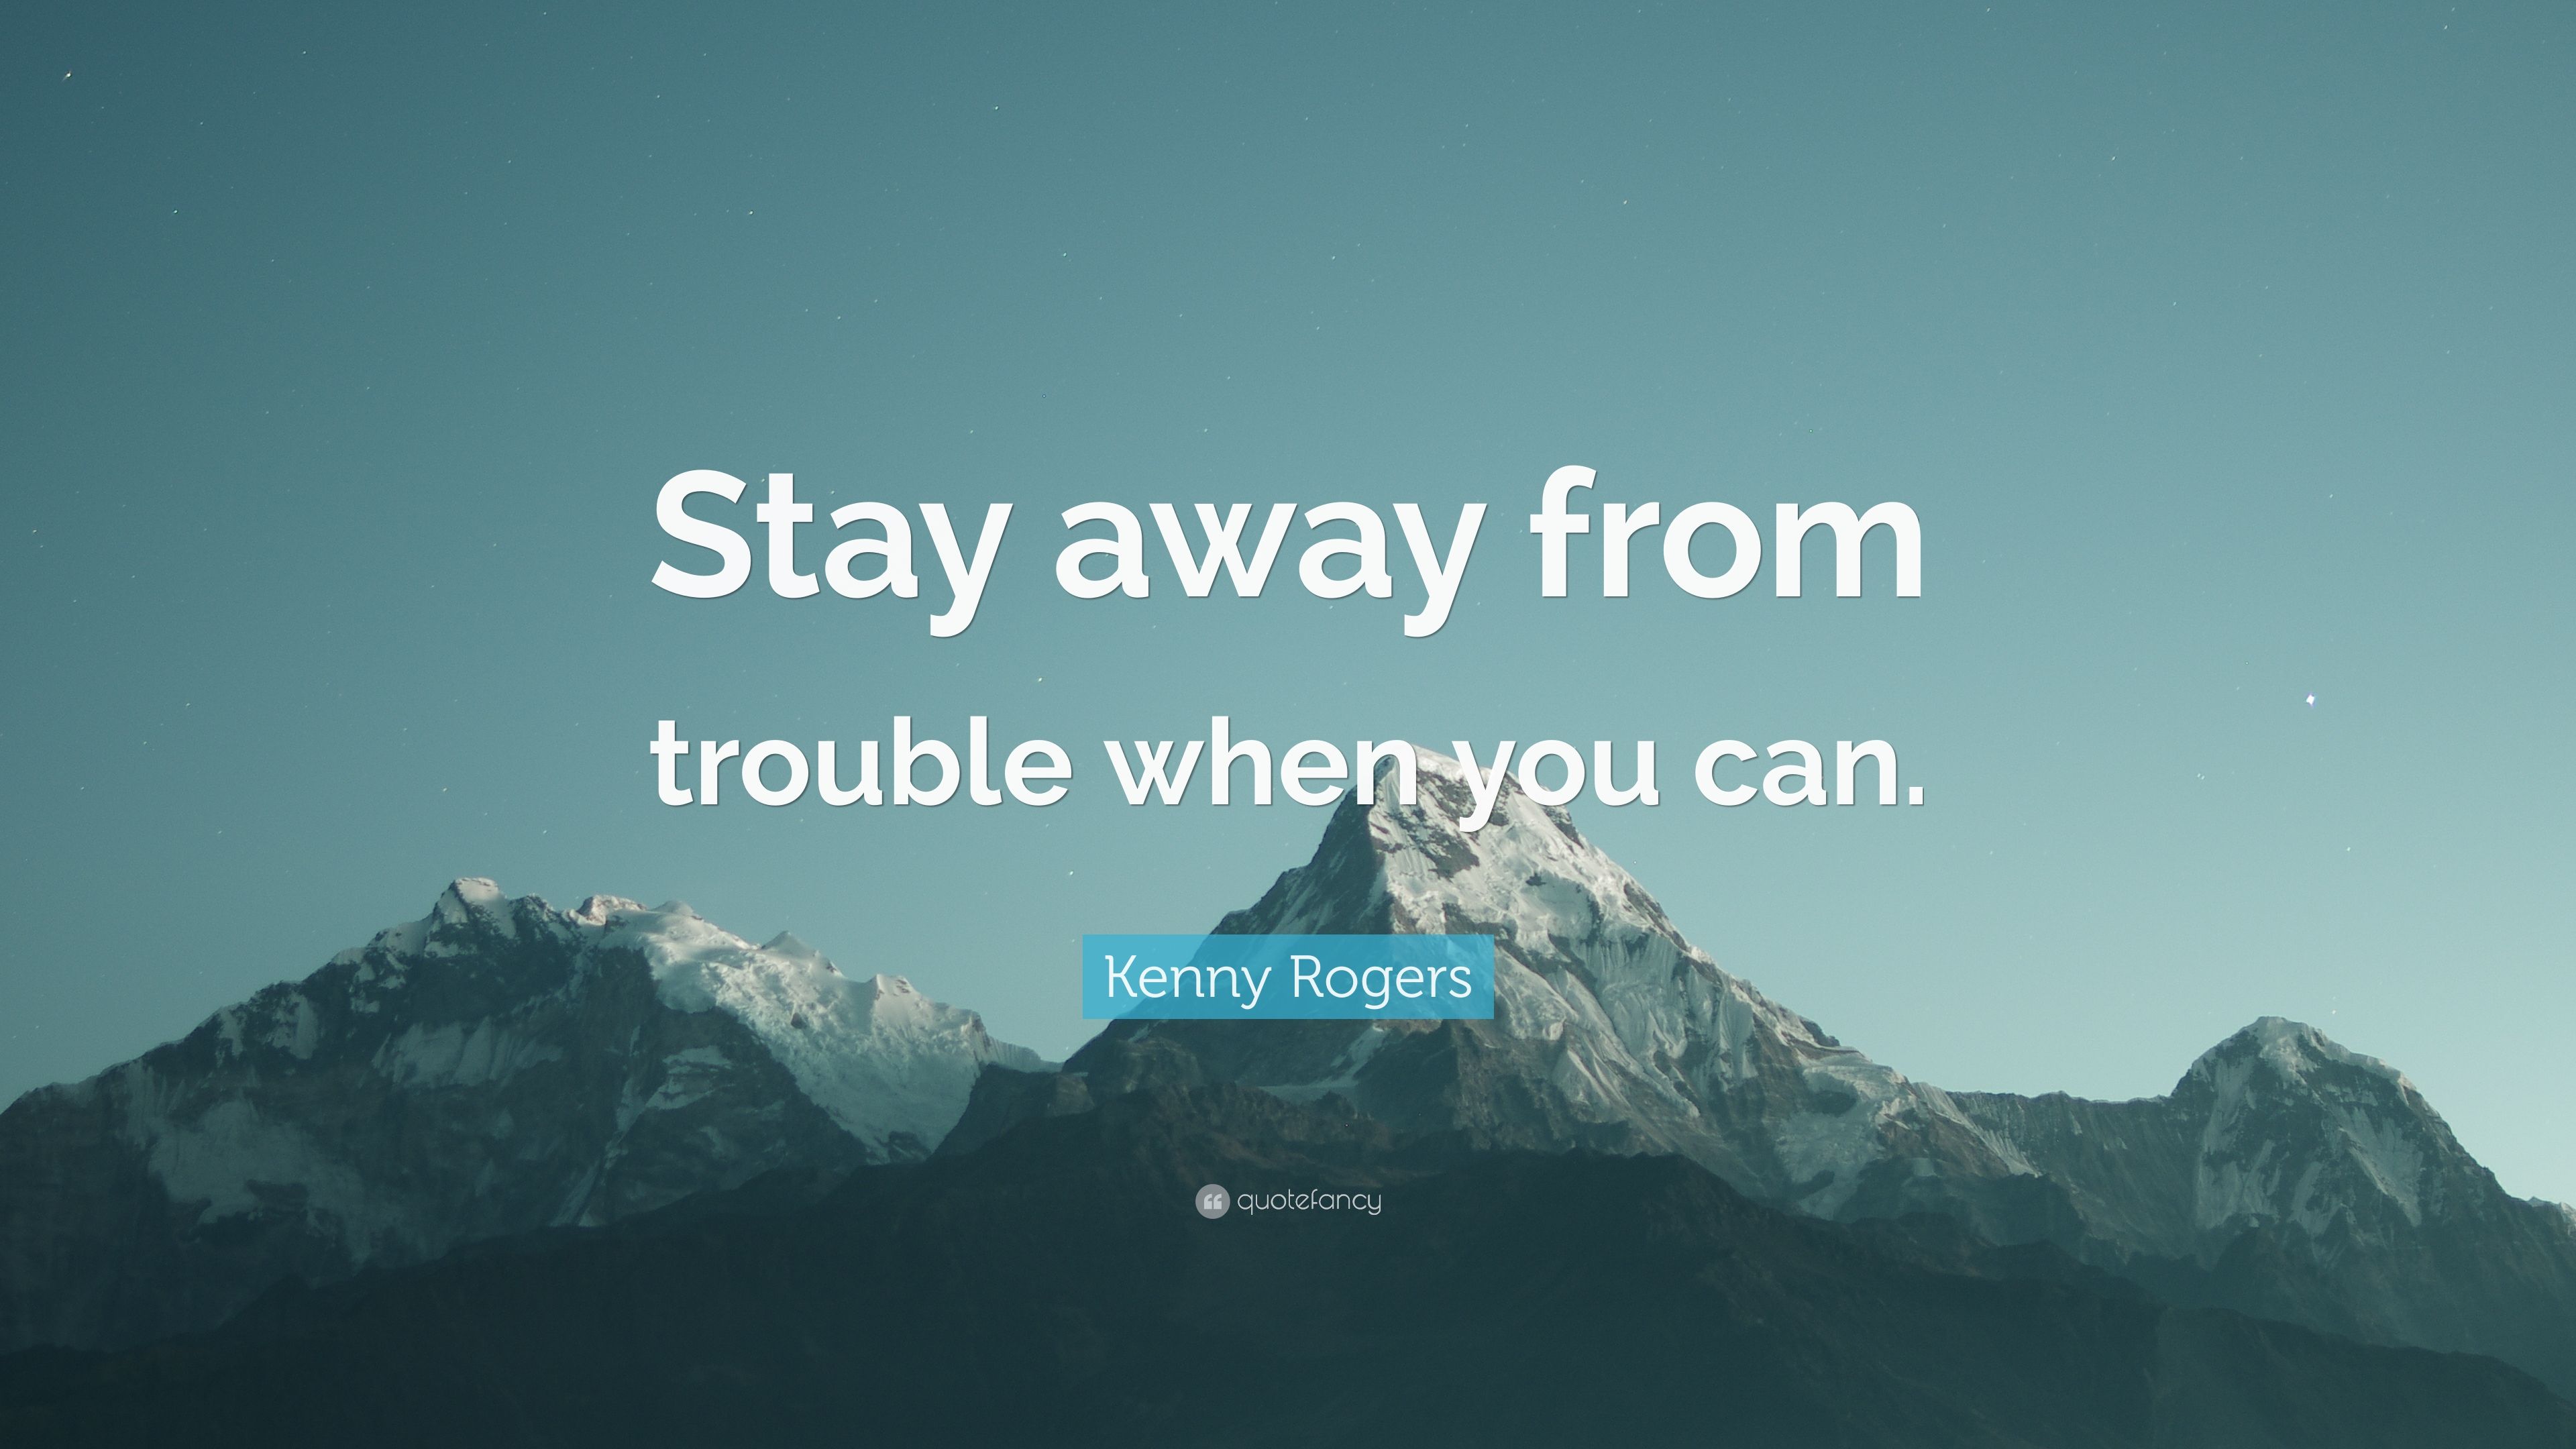 Kenny Rogers Quote: “Stay away from trouble when you can.” (7 wallpaper)